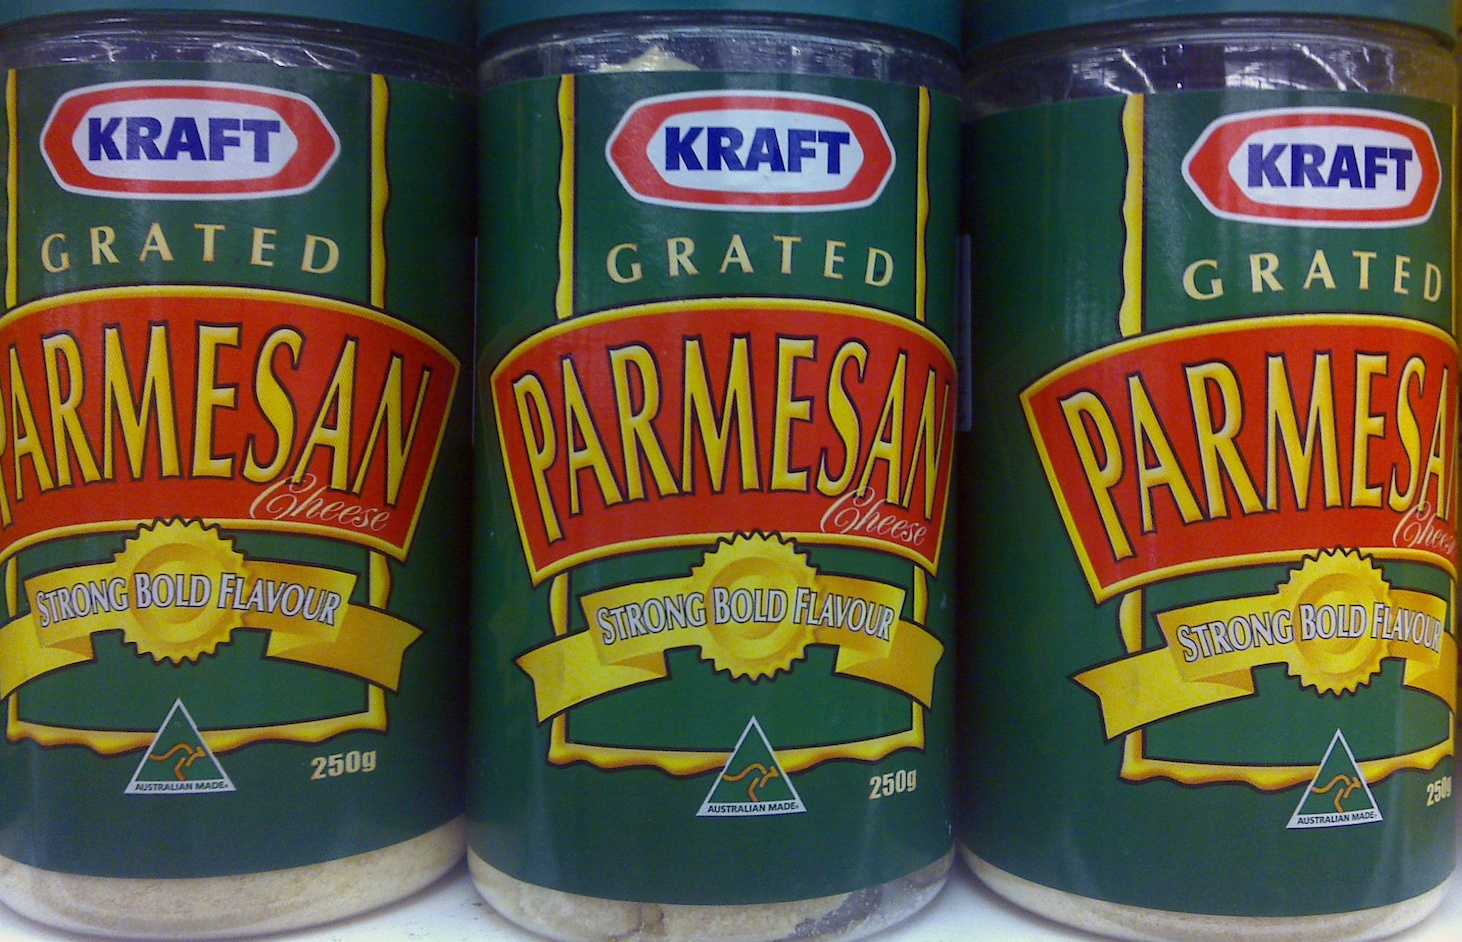 Kraft grated parmesan with strong bold flavor on a shelf. Jan. 2021